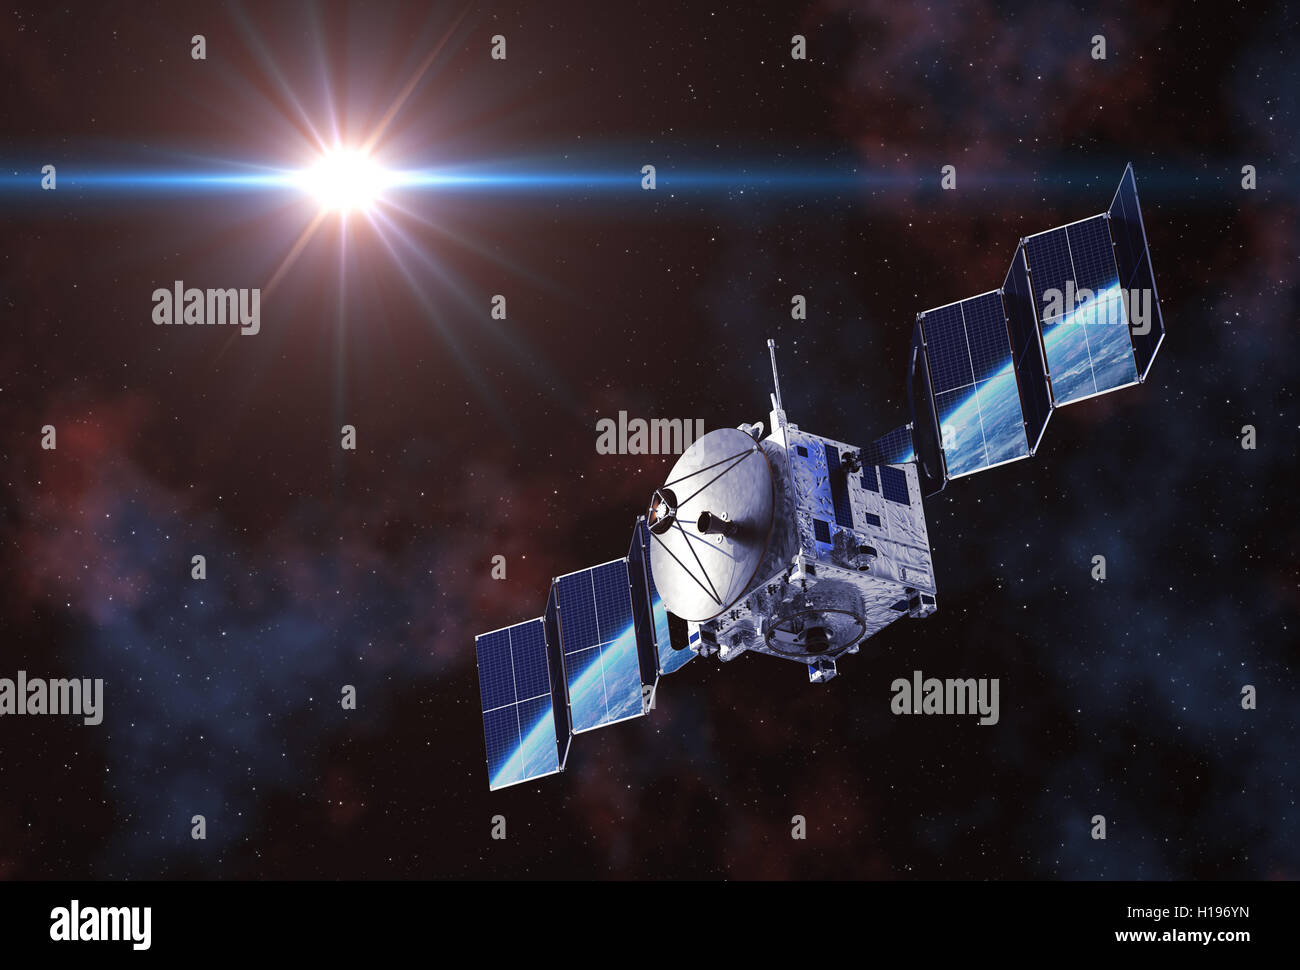 Satellite Deploys Solar Panels And Earth Reflected In Them. 3D Illustration. Stock Photo